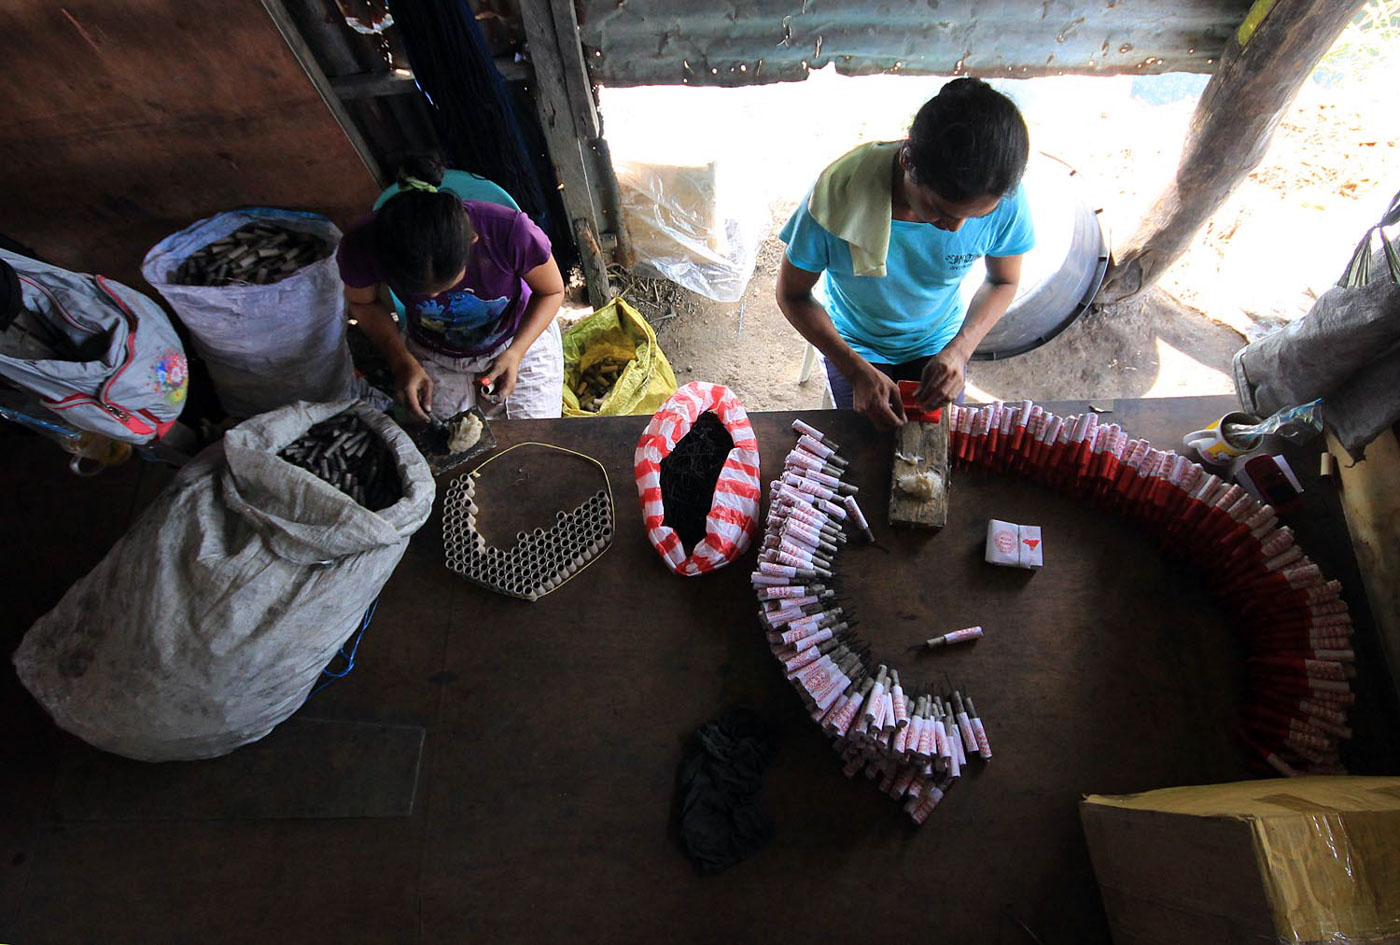 NEW YEAR'S EVE PREPS. Firecrackers and luces workers load a powder or polvora inside luces shells at a fireworks factory in Bocaue, Bulacan on December 26, 2017. Photo by Darren Langit/Rappler  